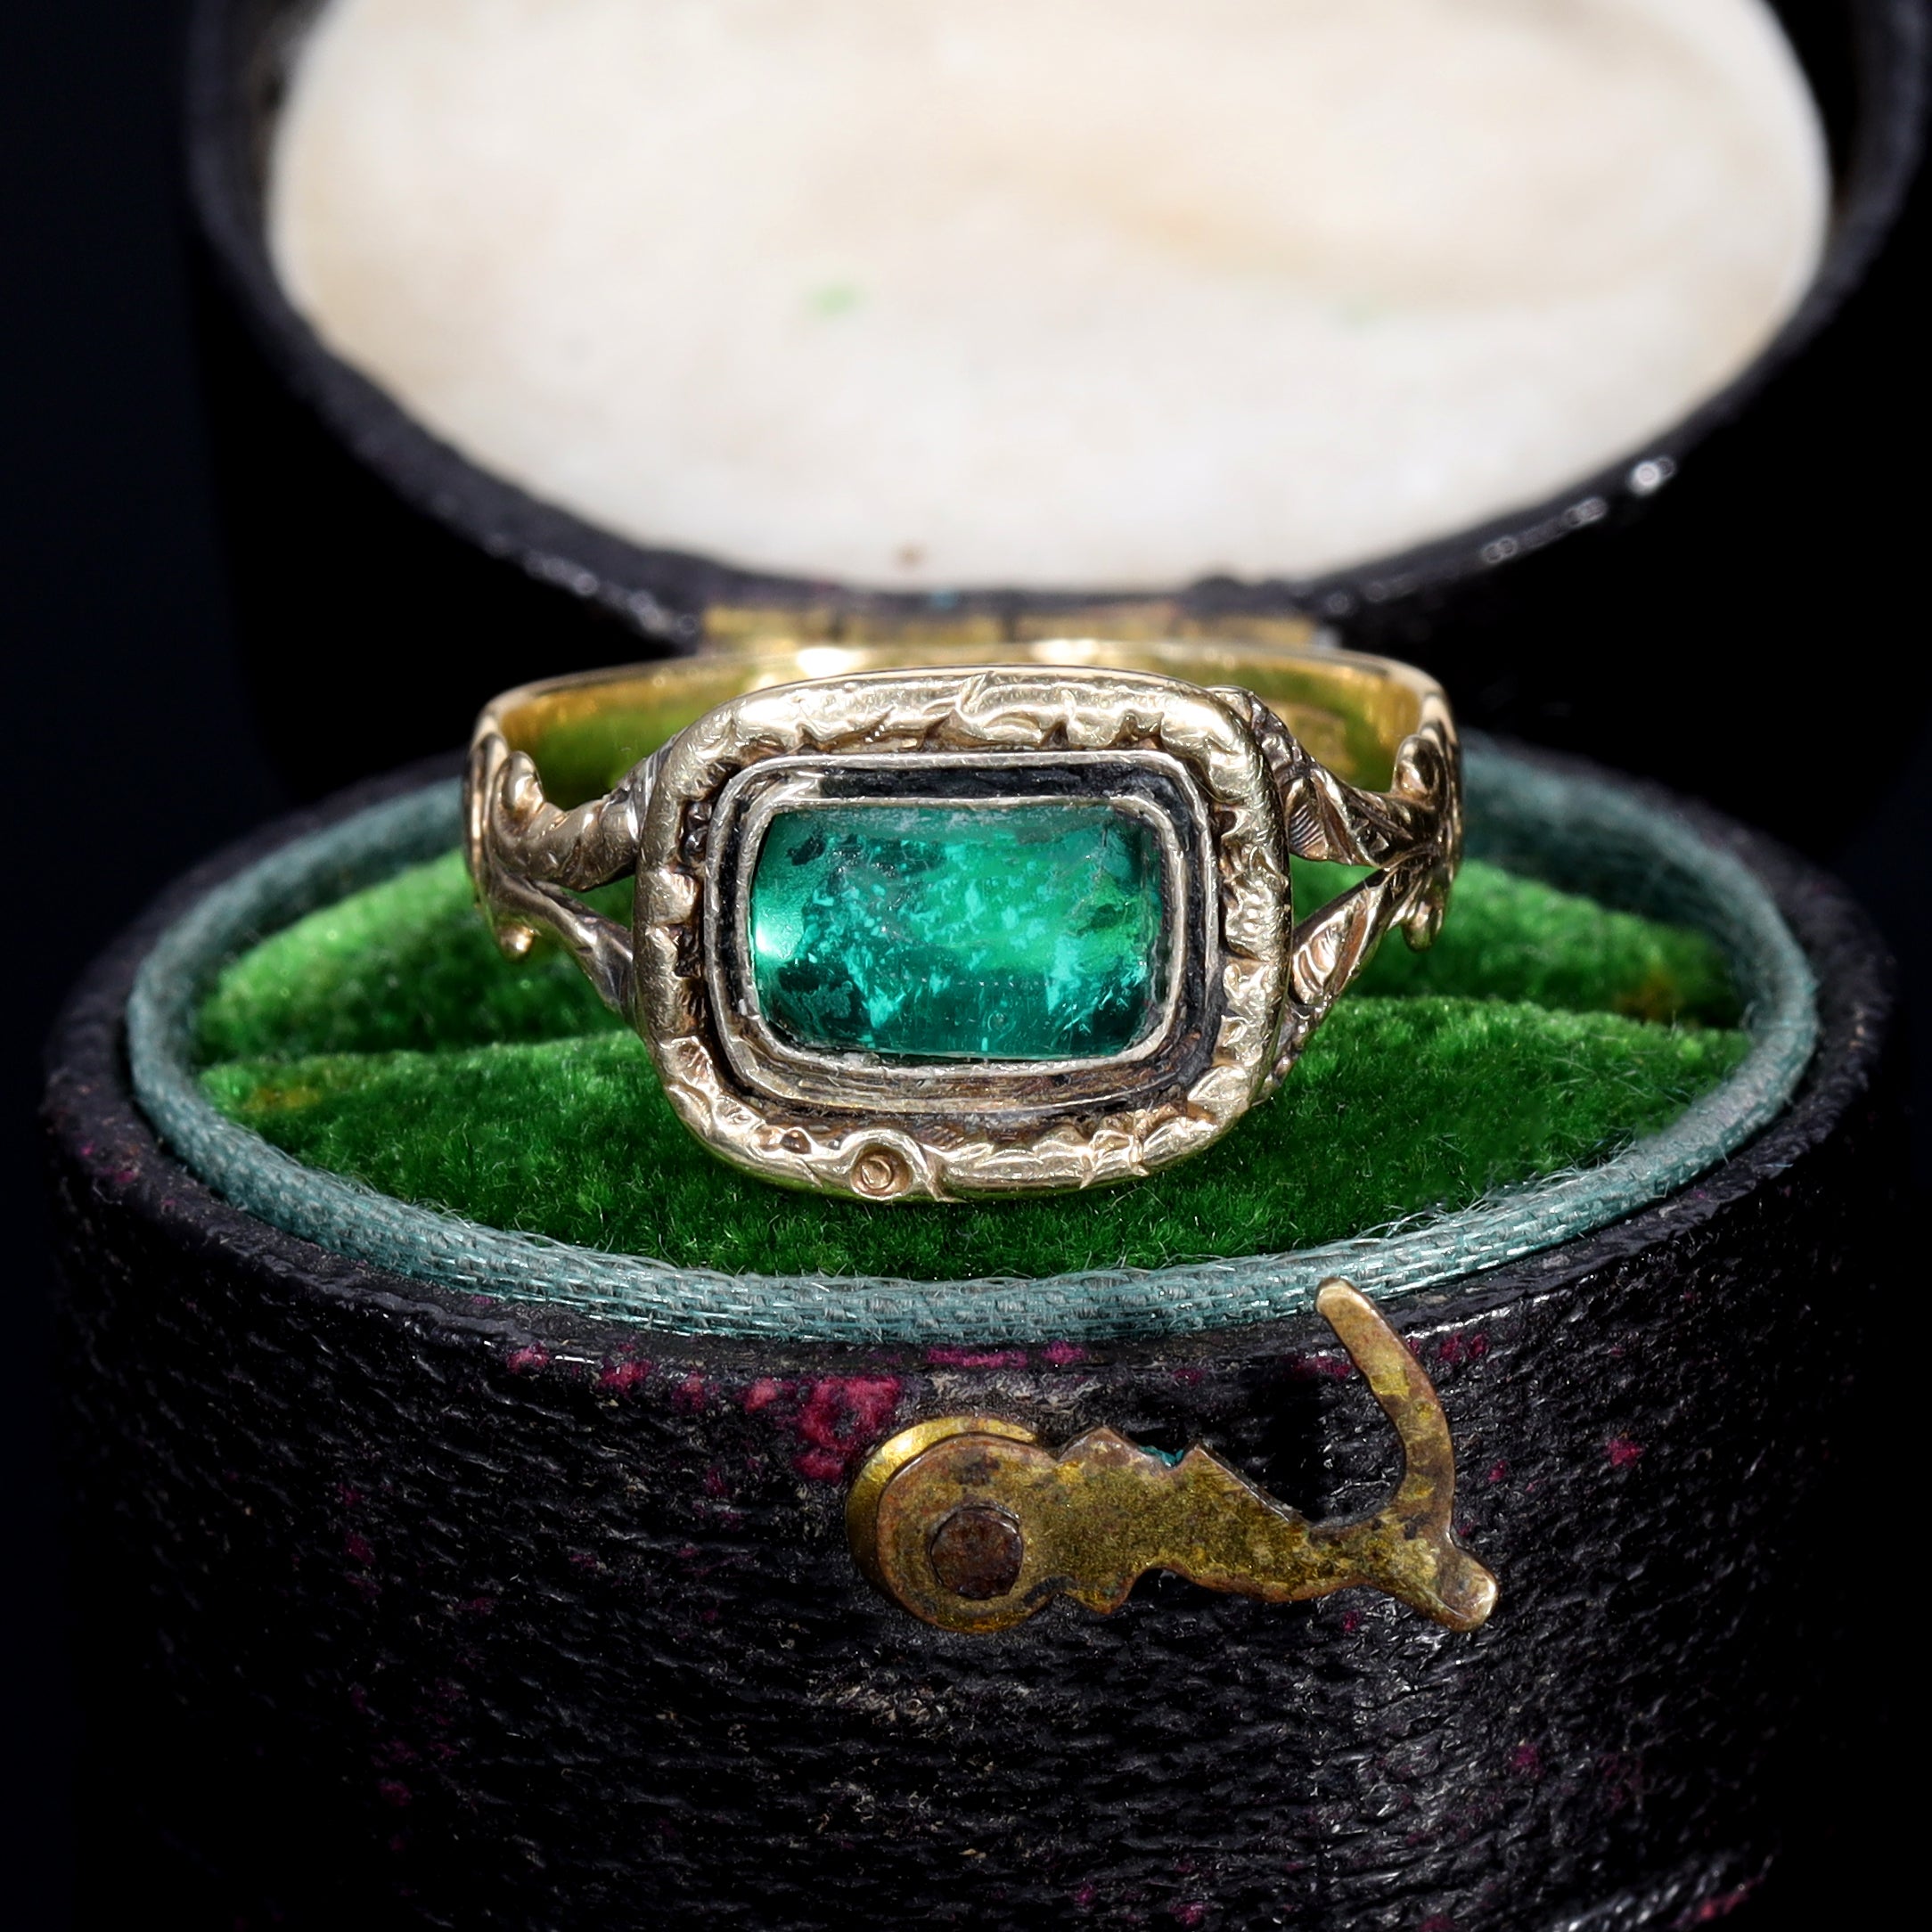 The Antique Georgian 1822 Foil Backed Green Paste Ring - Antique Jewellers